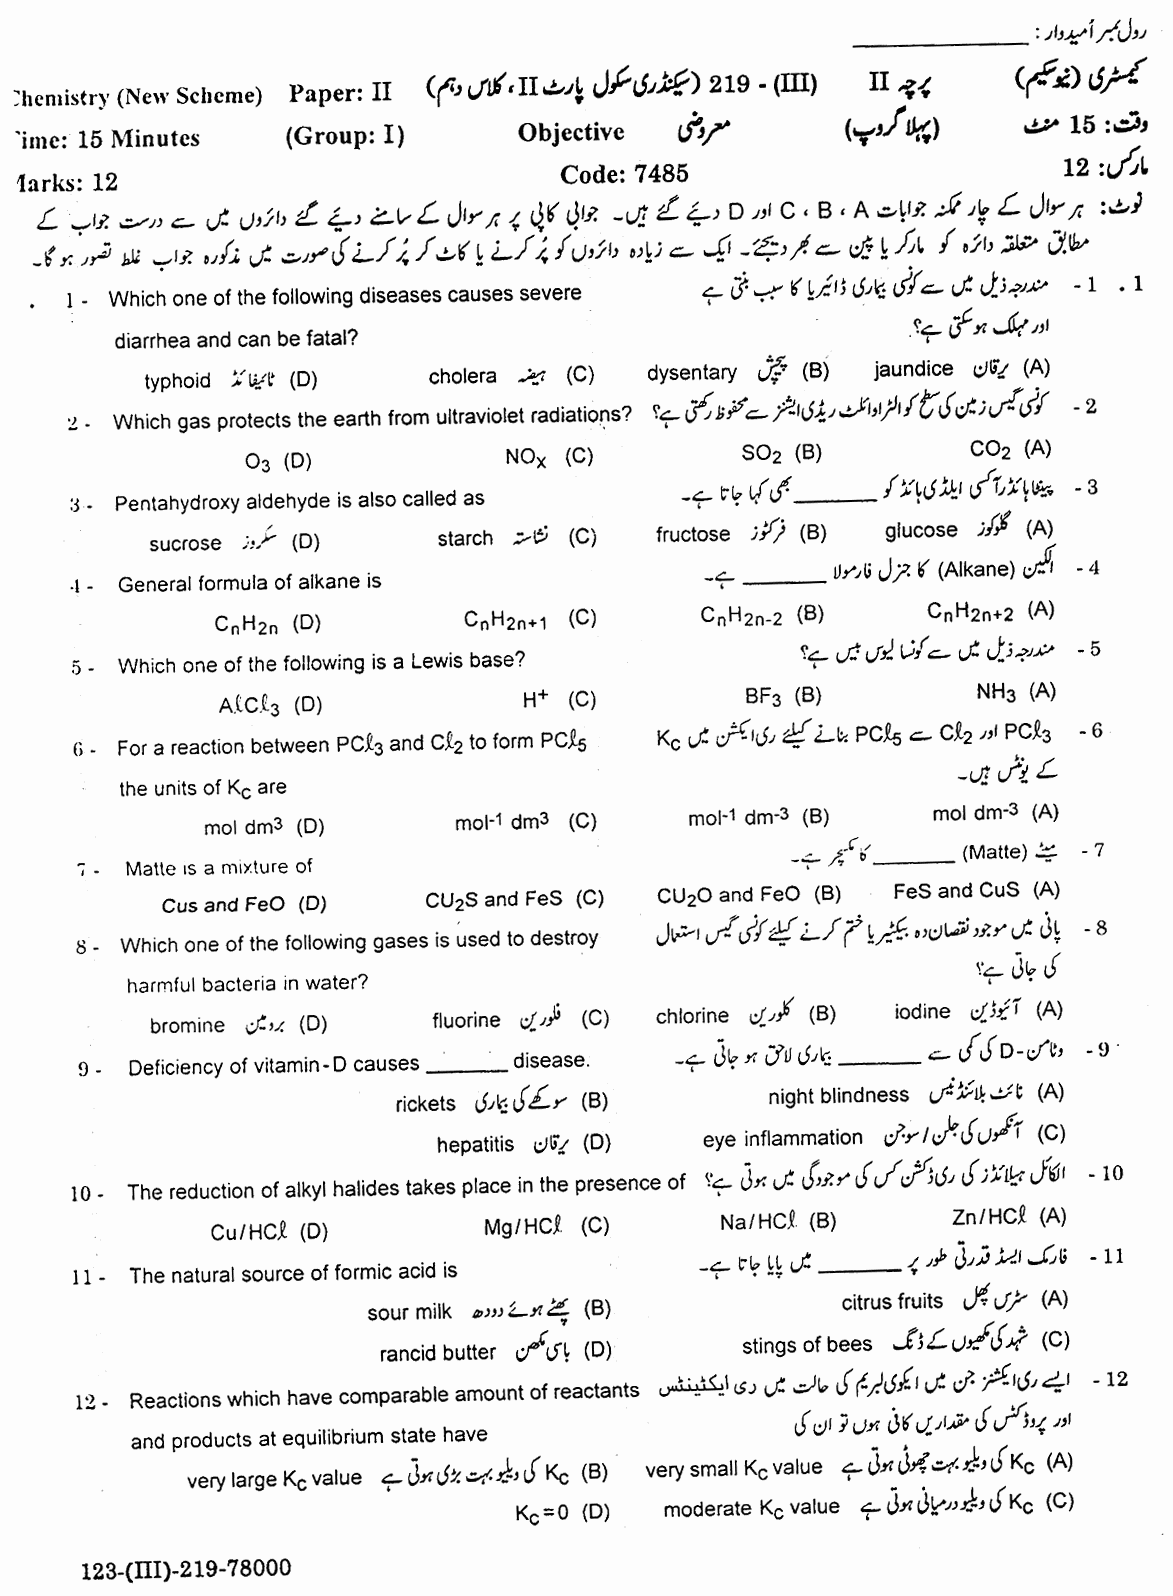 10th Class Chemistry Paper 2019 Gujranwala Board Objective Group 1